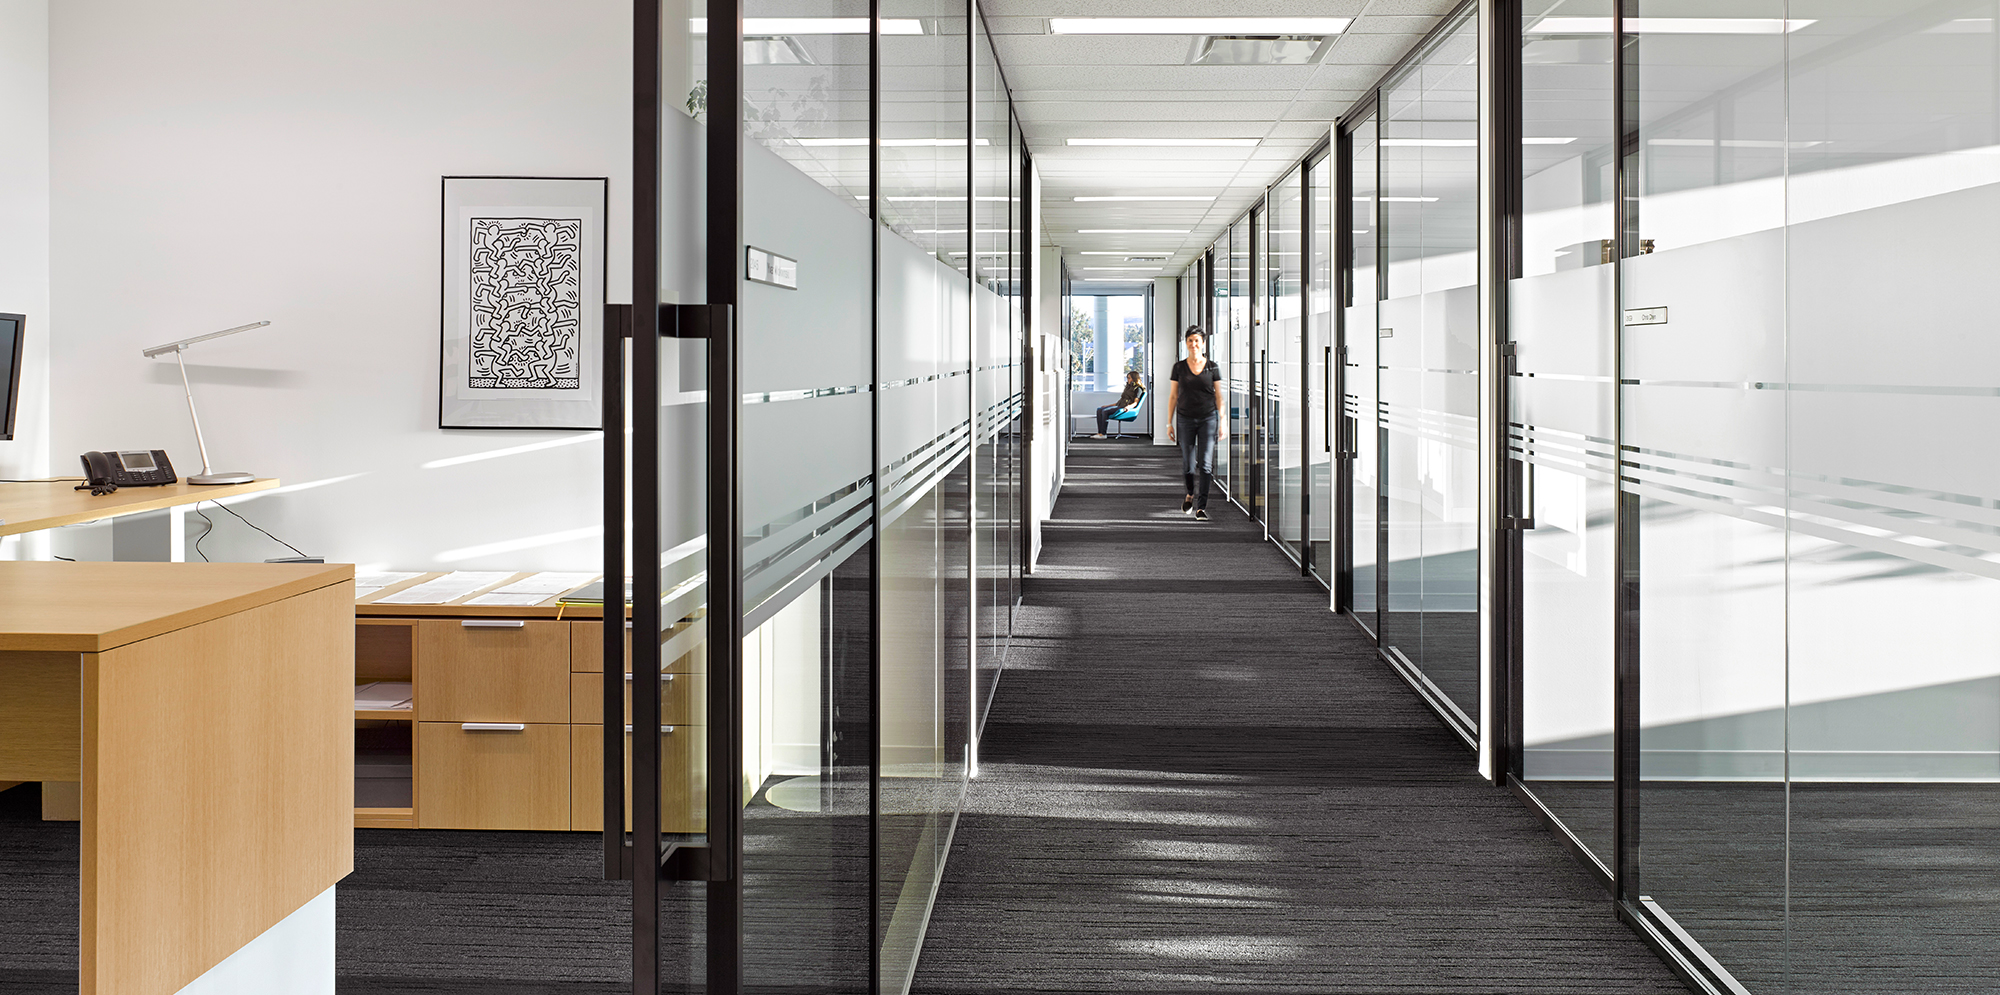 Hallway with multiple offices inside CMG Headquarters, designed by IBI Group